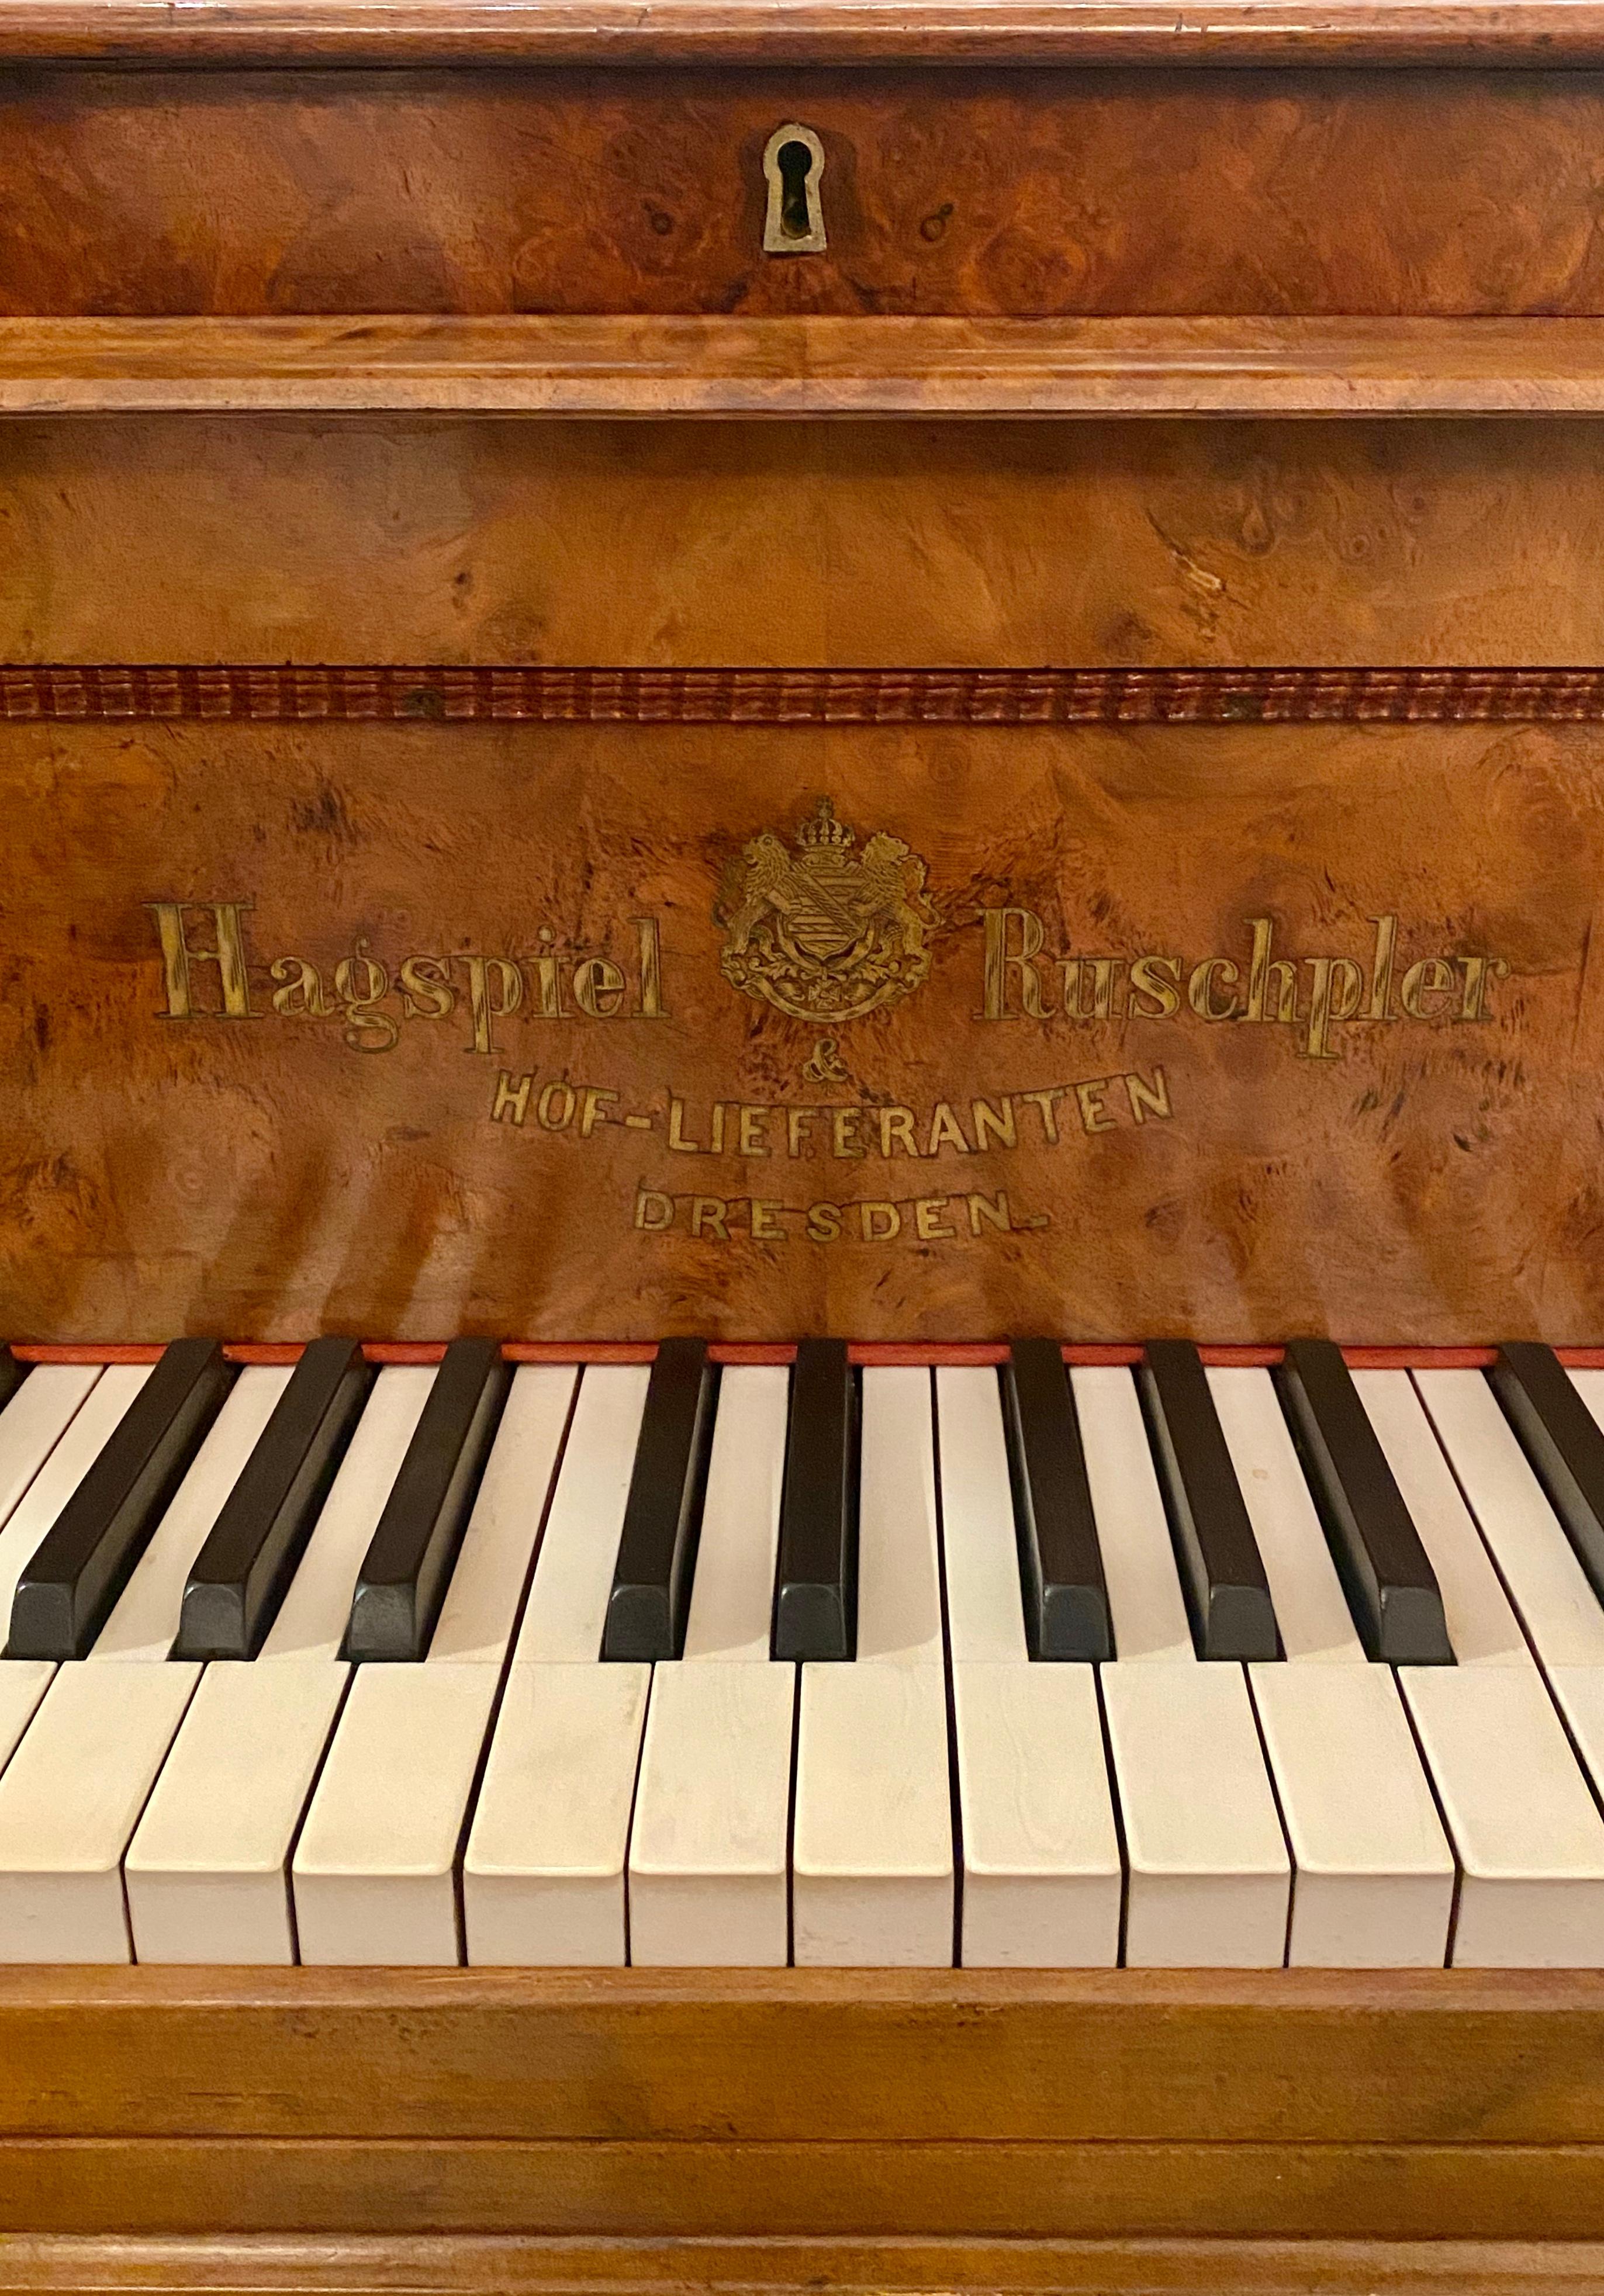 Antique Burled Walnut Parlor Grand Piano Made by Hagspiel & Ruschpler circa 1875 7